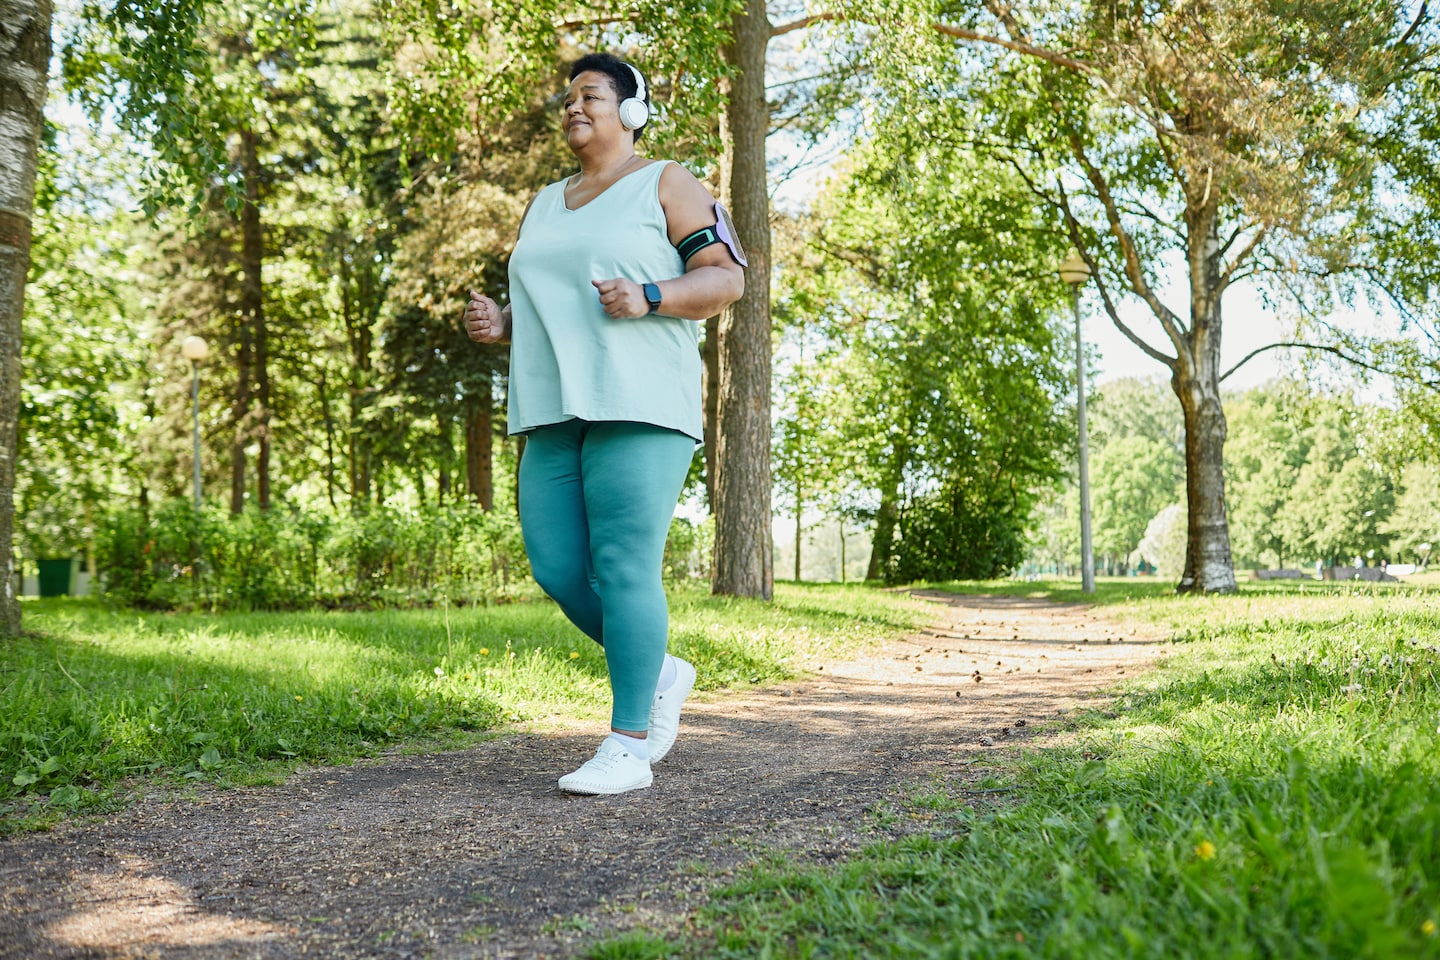 After age 60, 10,000 steps may no longer be the right fitness goal